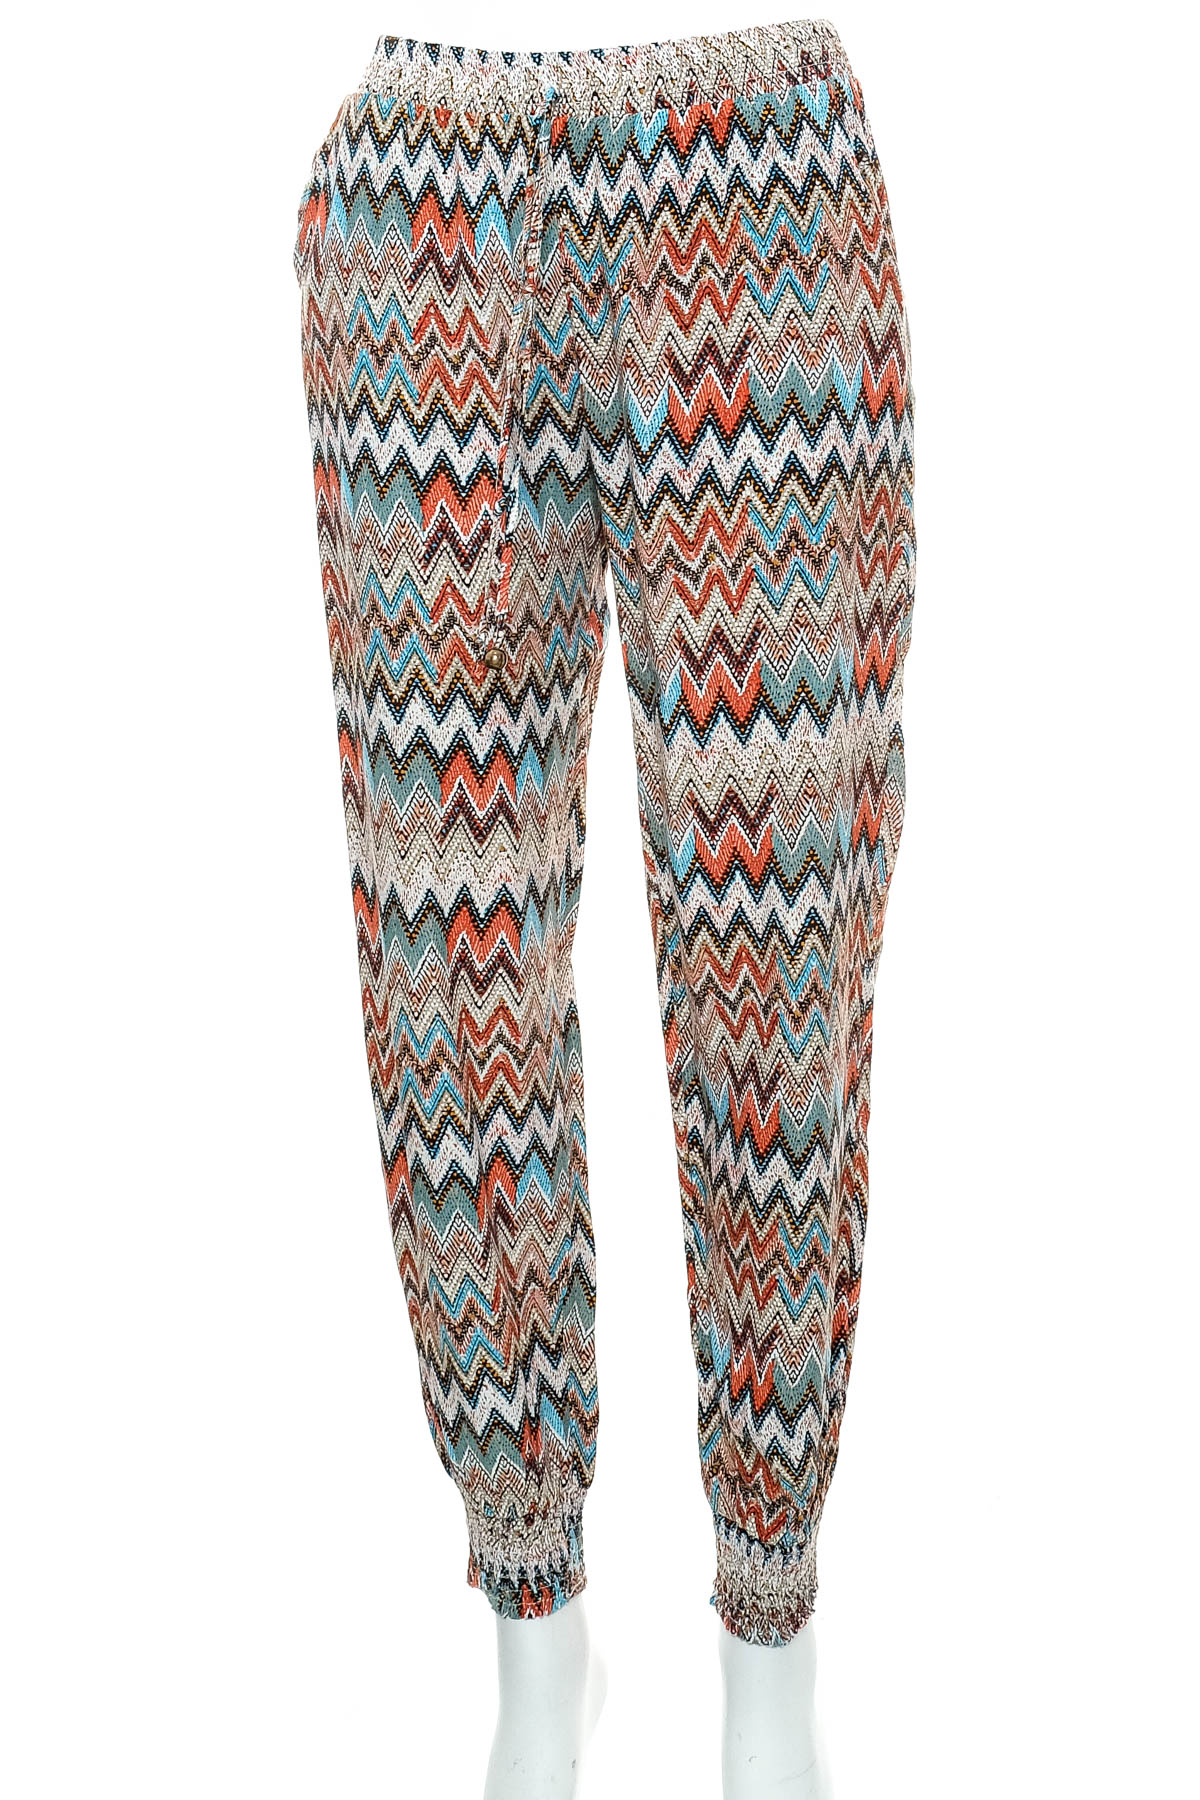 Women's trousers - Orcelly - 0